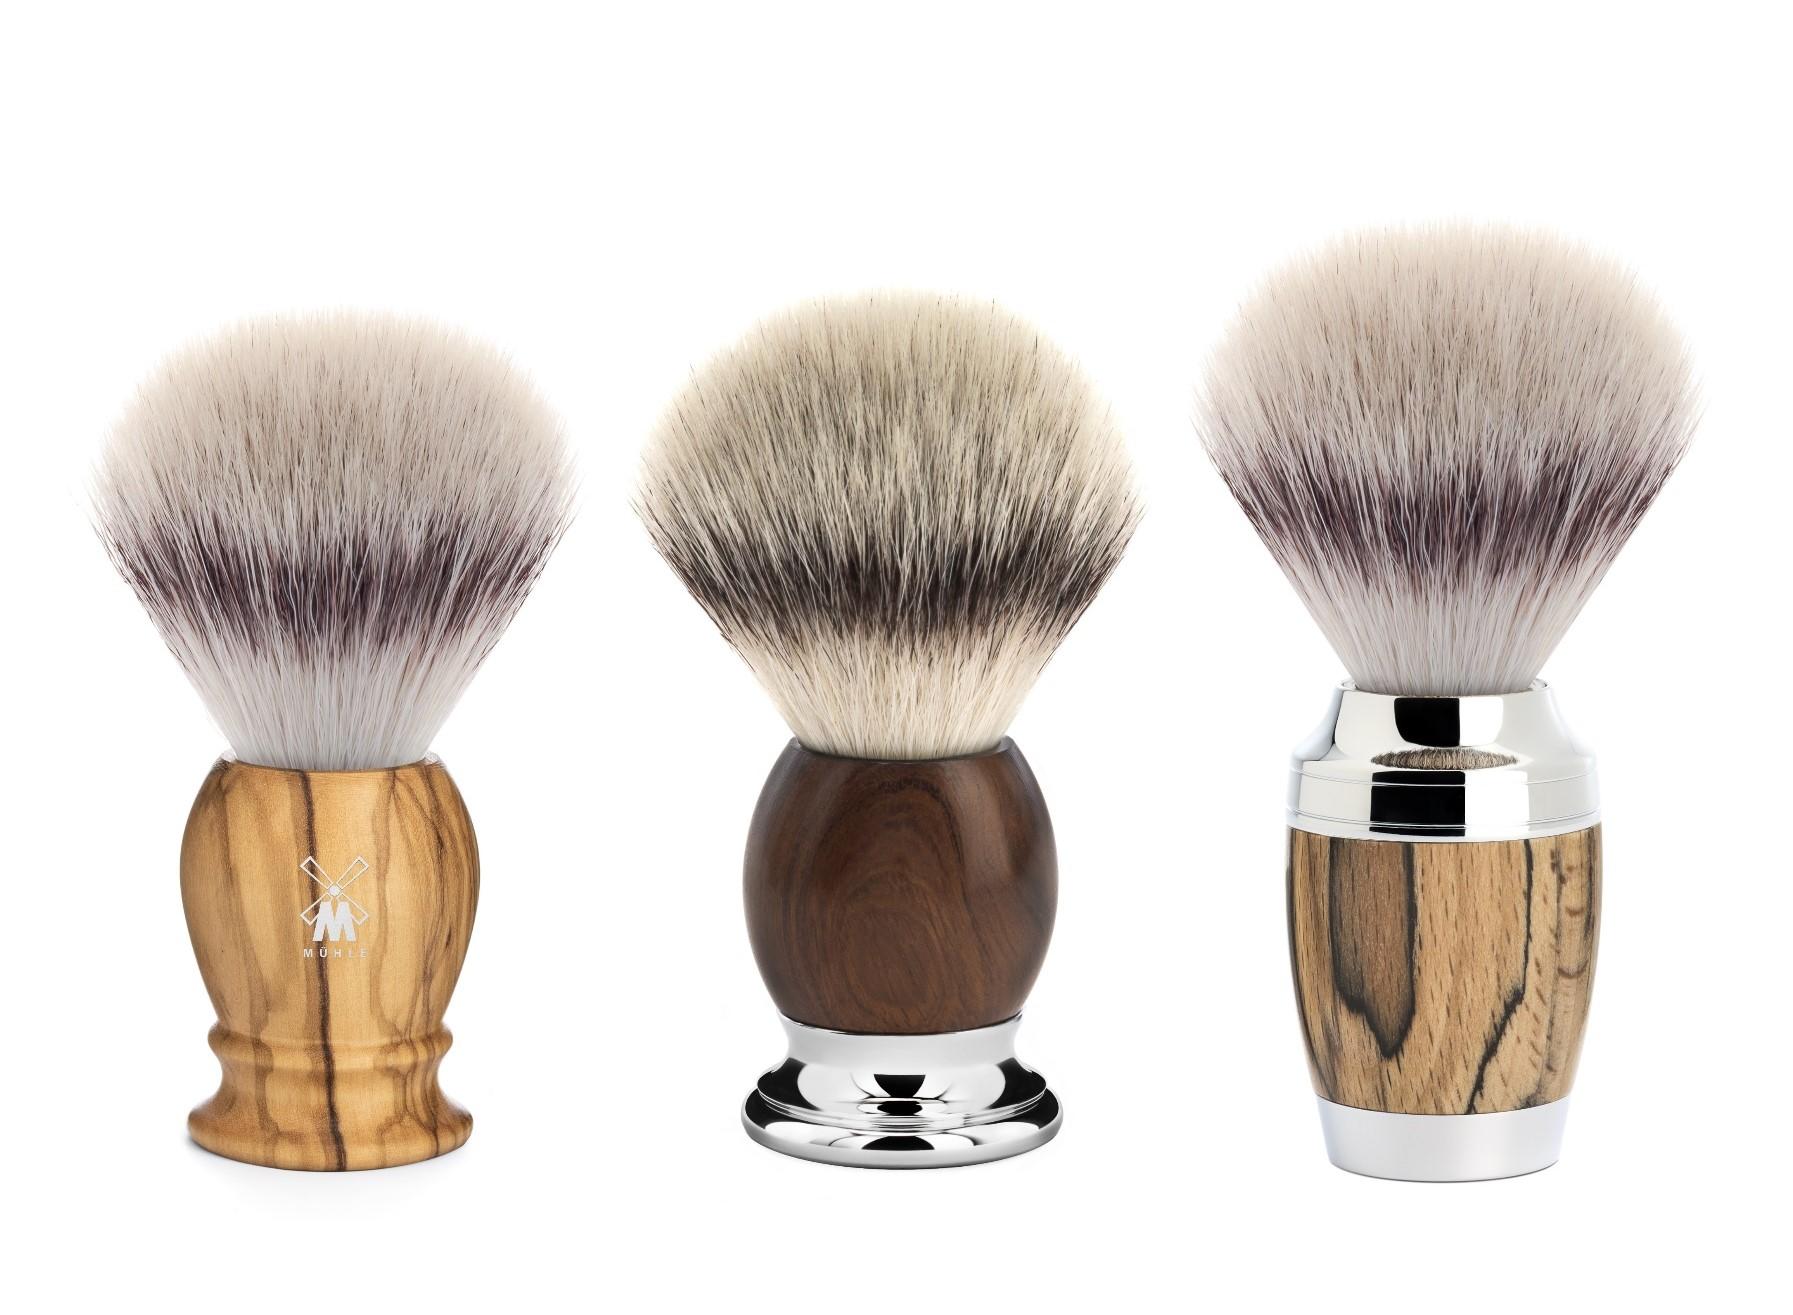 From left to right: The new Olive Wood CLASSIC brush in Silvertip fibre, SOPHIST Ironwood in Silvertip Fibre and STYLO Spalted Beechwood in Silvertip Fibre.